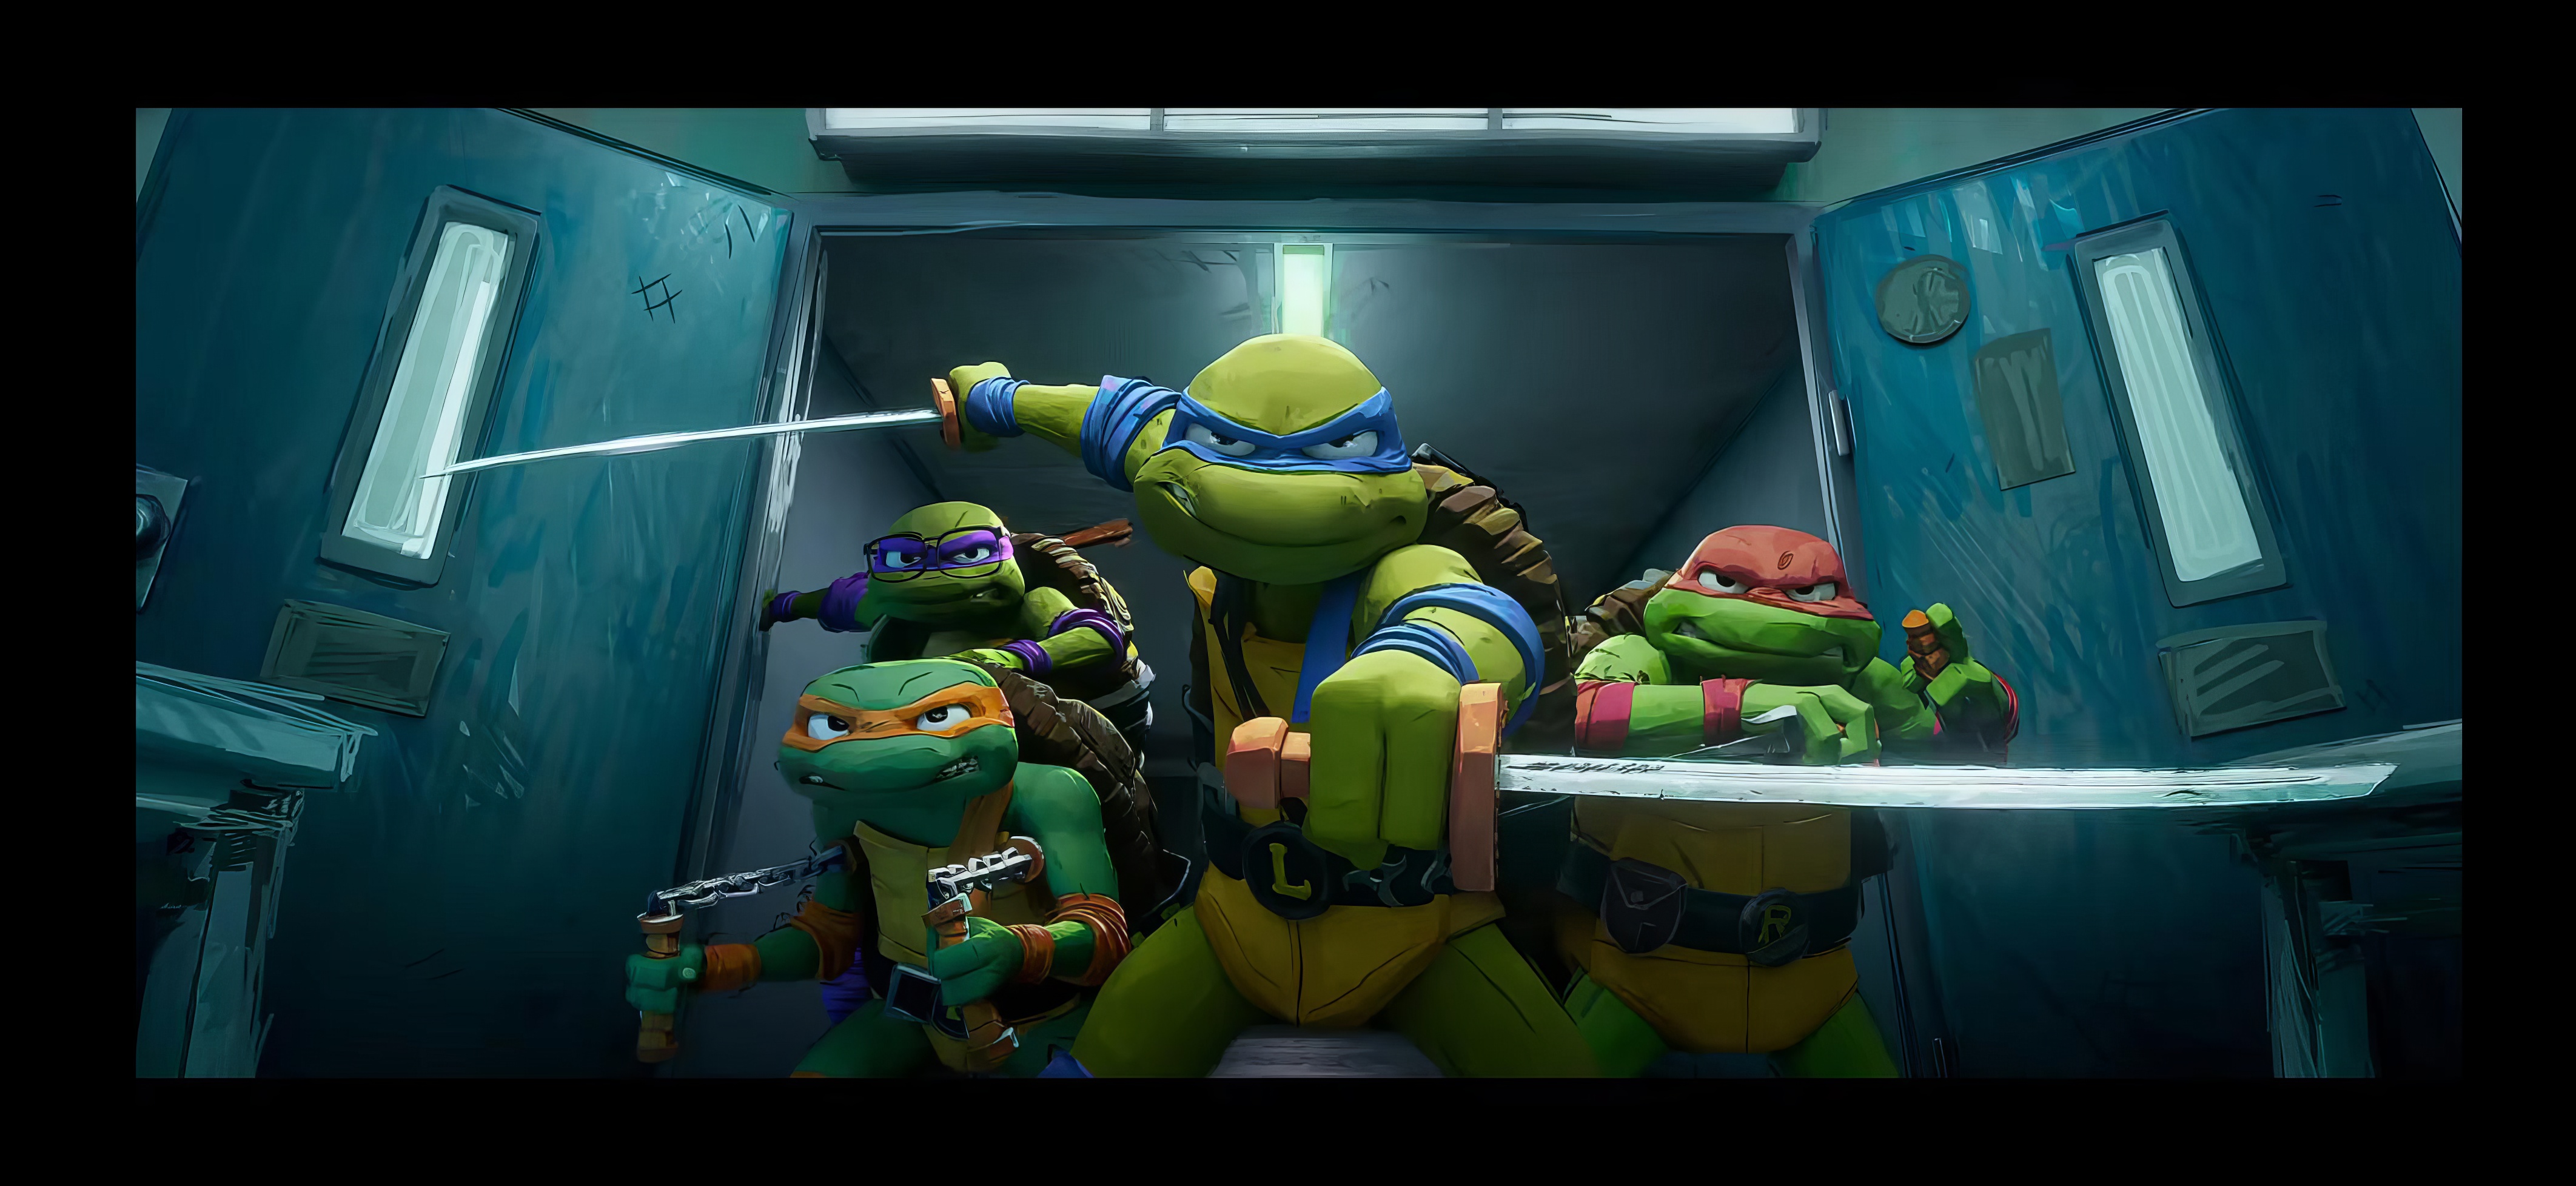 HD wallpaper featuring the Teenage Mutant Ninja Turtles from 'Mutant Mayhem' posing in an elevator ready for action.